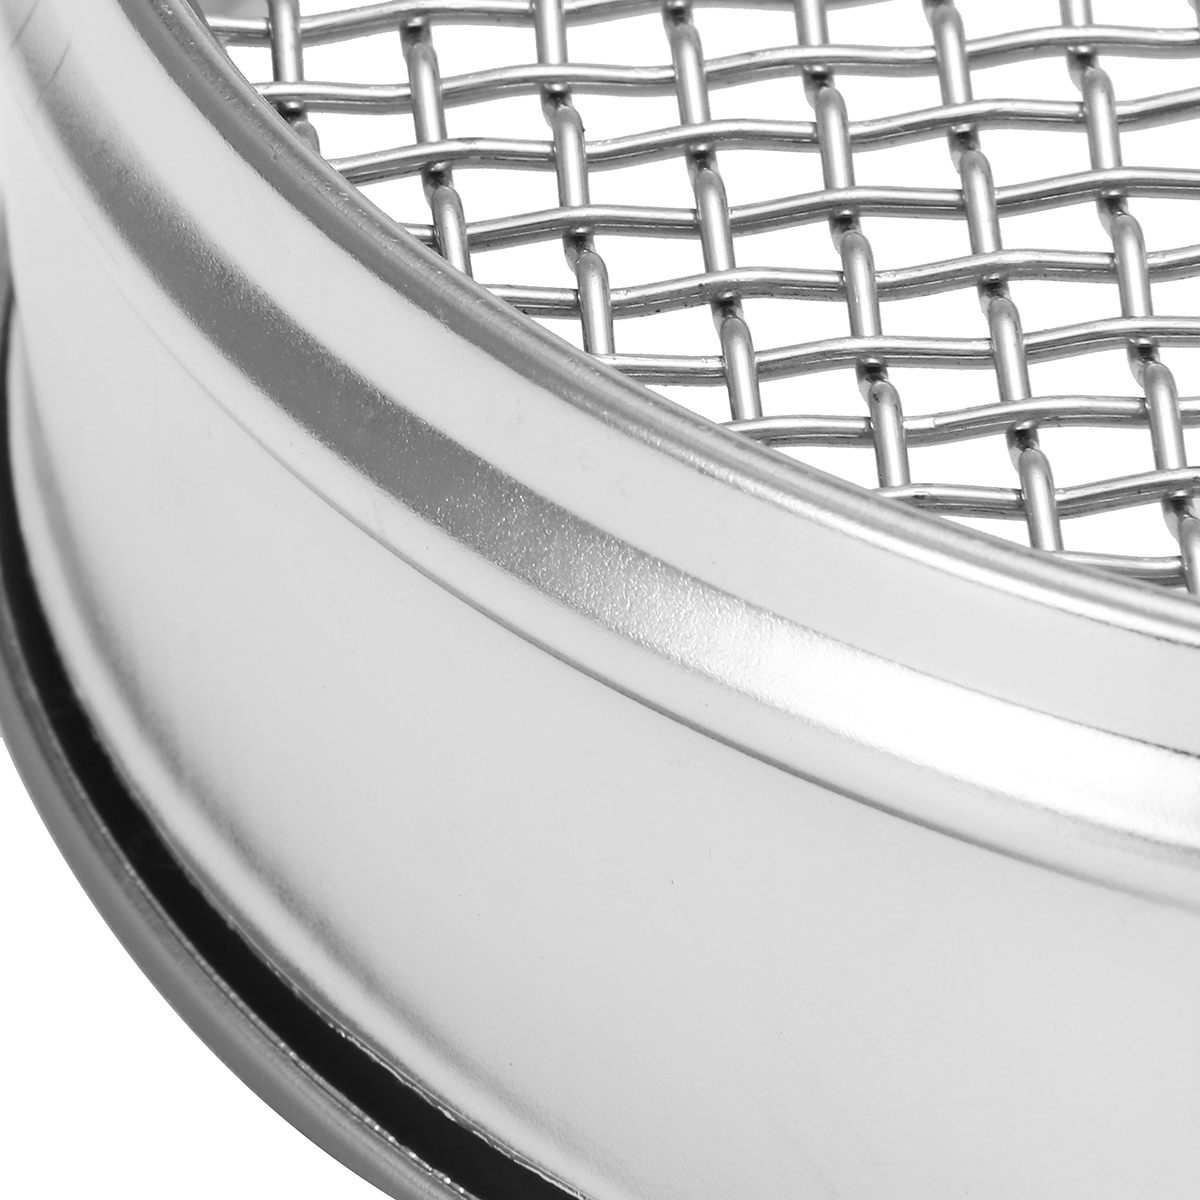 Find 4 100 Mesh 4 75 0 15mm Aperture Lab Standard Test Sieve Stainless Steel Dia20cm for Sale on Gipsybee.com with cryptocurrencies